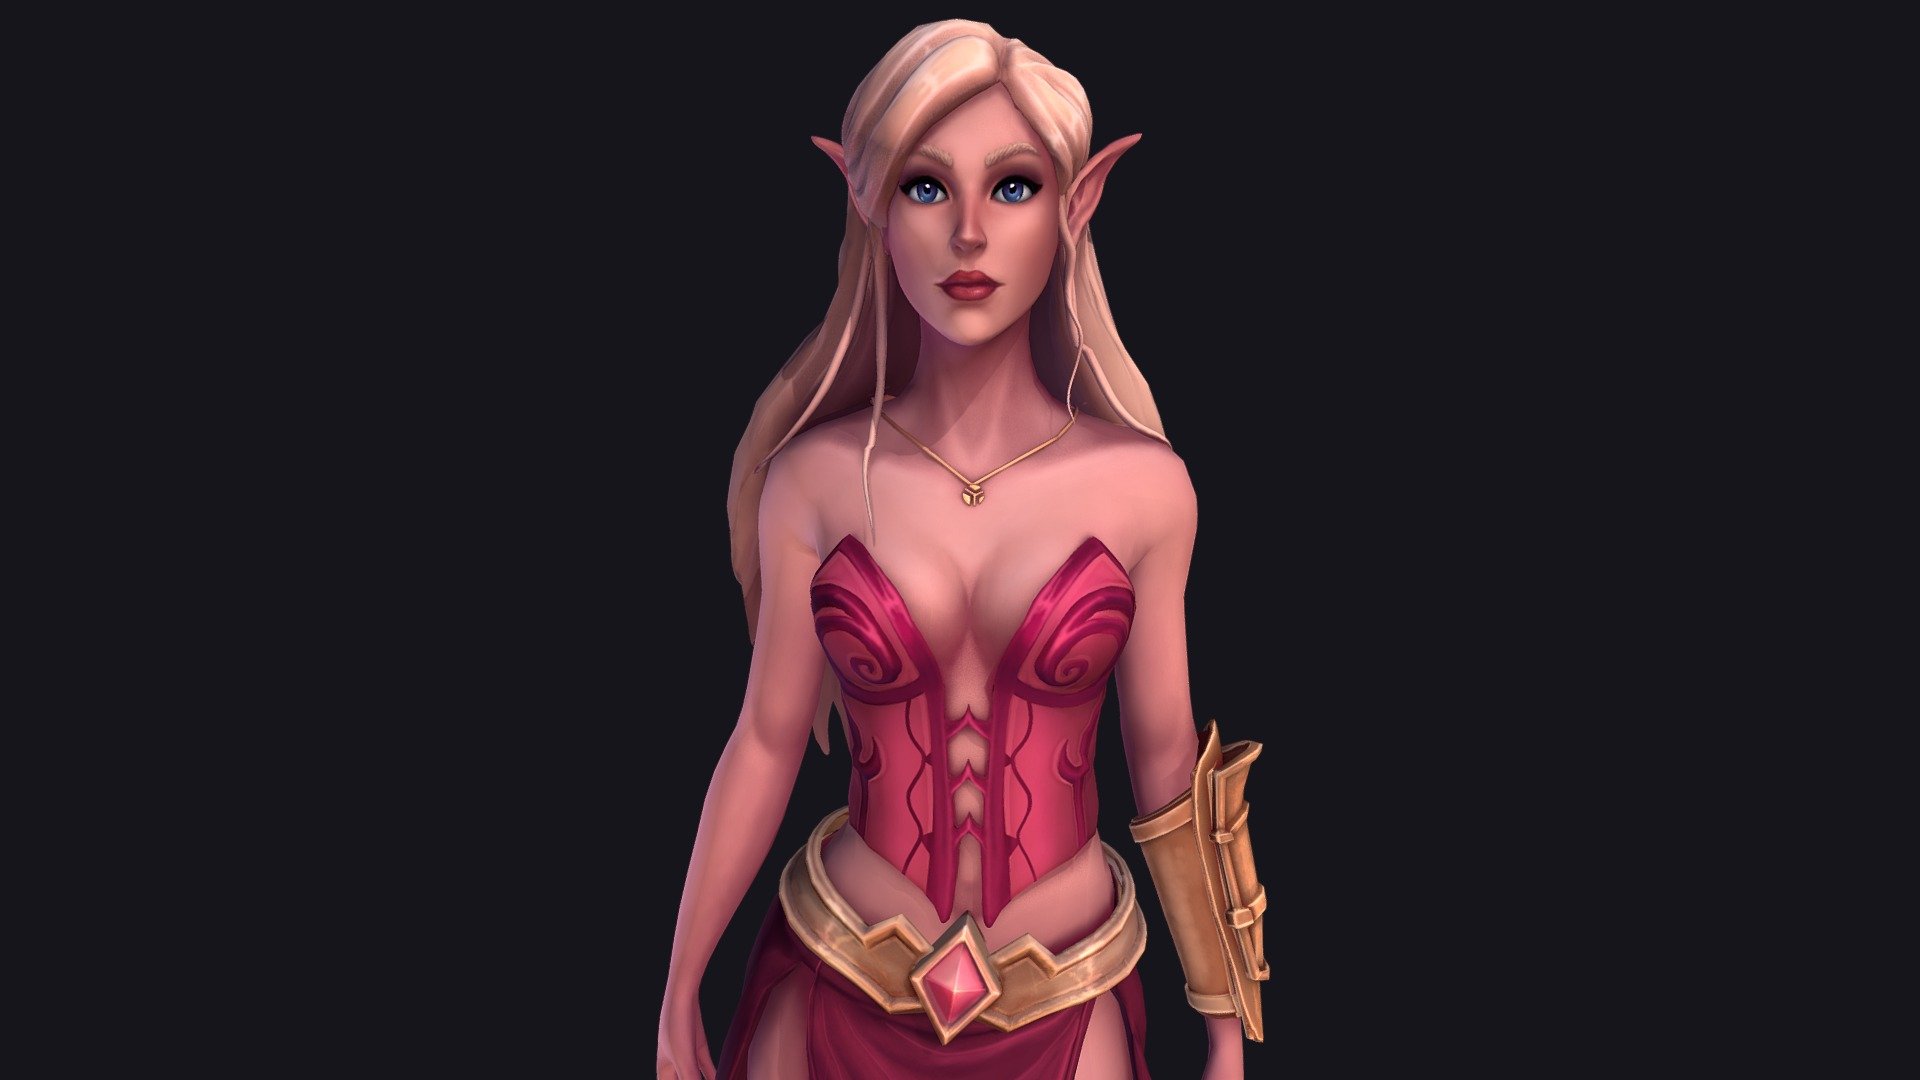 See more about this project on my Artstation www.artstation.com/victoriareinhold

Here is a video of my texturing process https://youtu.be/GitRMHGQ63E

This is a character I made during a three week long character course earlier this semester at FutureGames. I was inspired by the character design and style of Stunlock Studios Battlerite and also League of Legends. The character design was also based on my own concept art/ sketches. When I started this project my goal was to get more comfortable in ZBrush but also practice hand painted texturing in Substance Painter 3d model